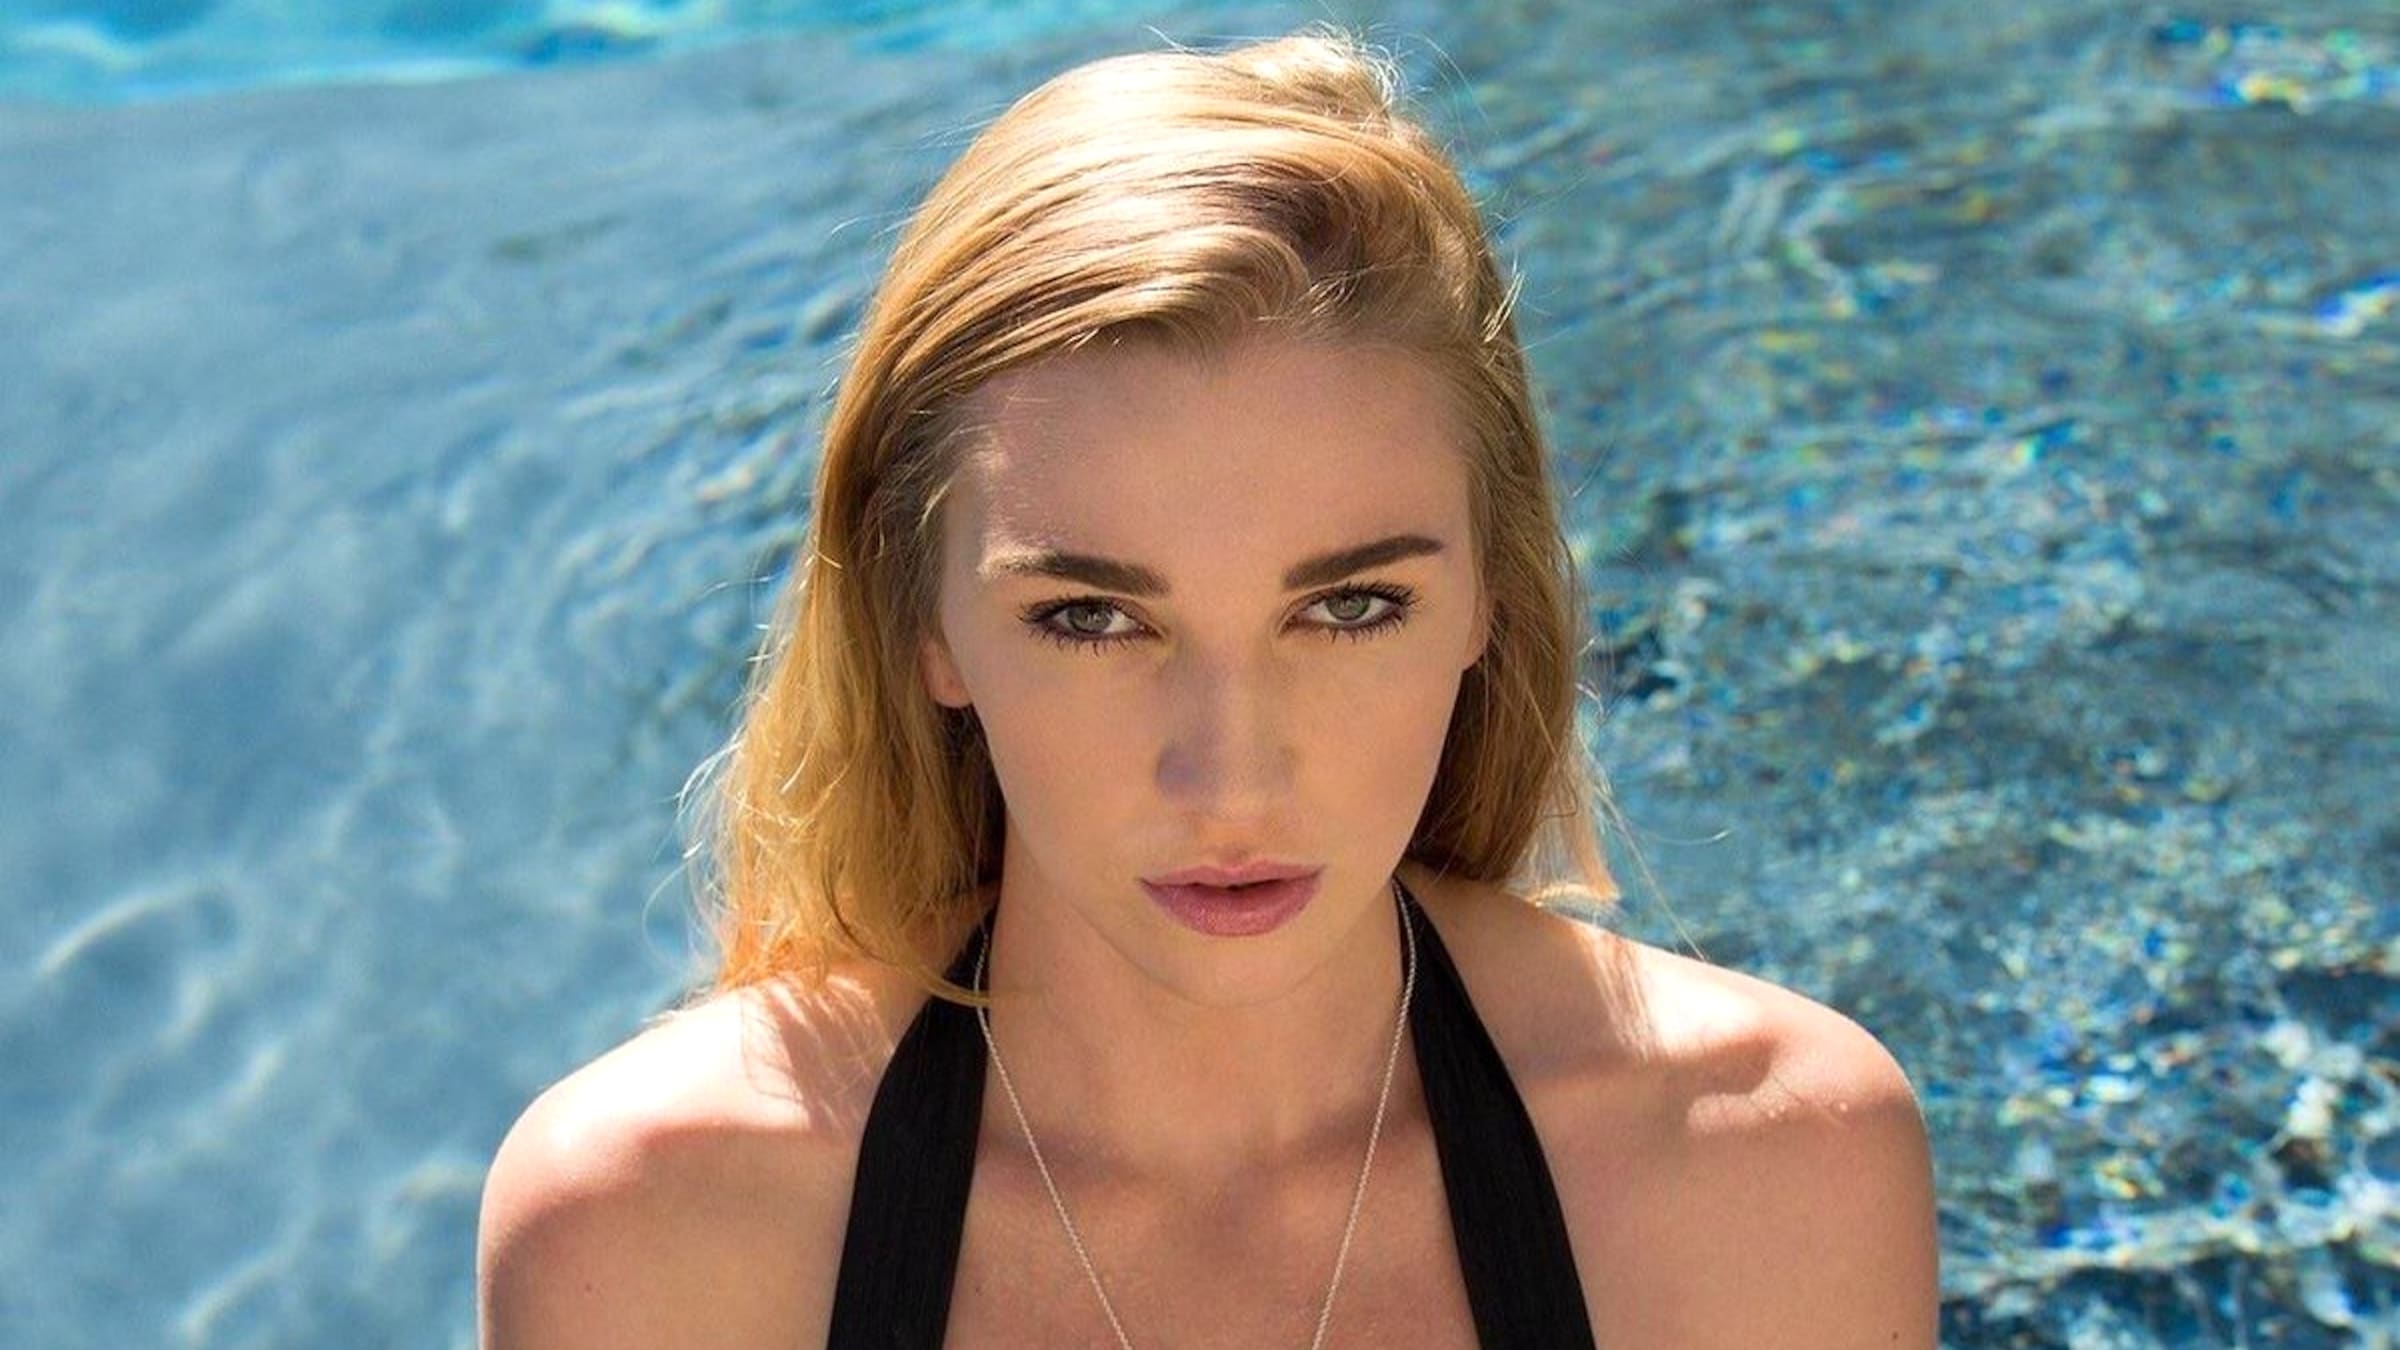 2400px x 1350px - Porn Star Kendra Sunderland Booted Off Instagram After 'Joking' About Sex  With CEO Adam Mosseri